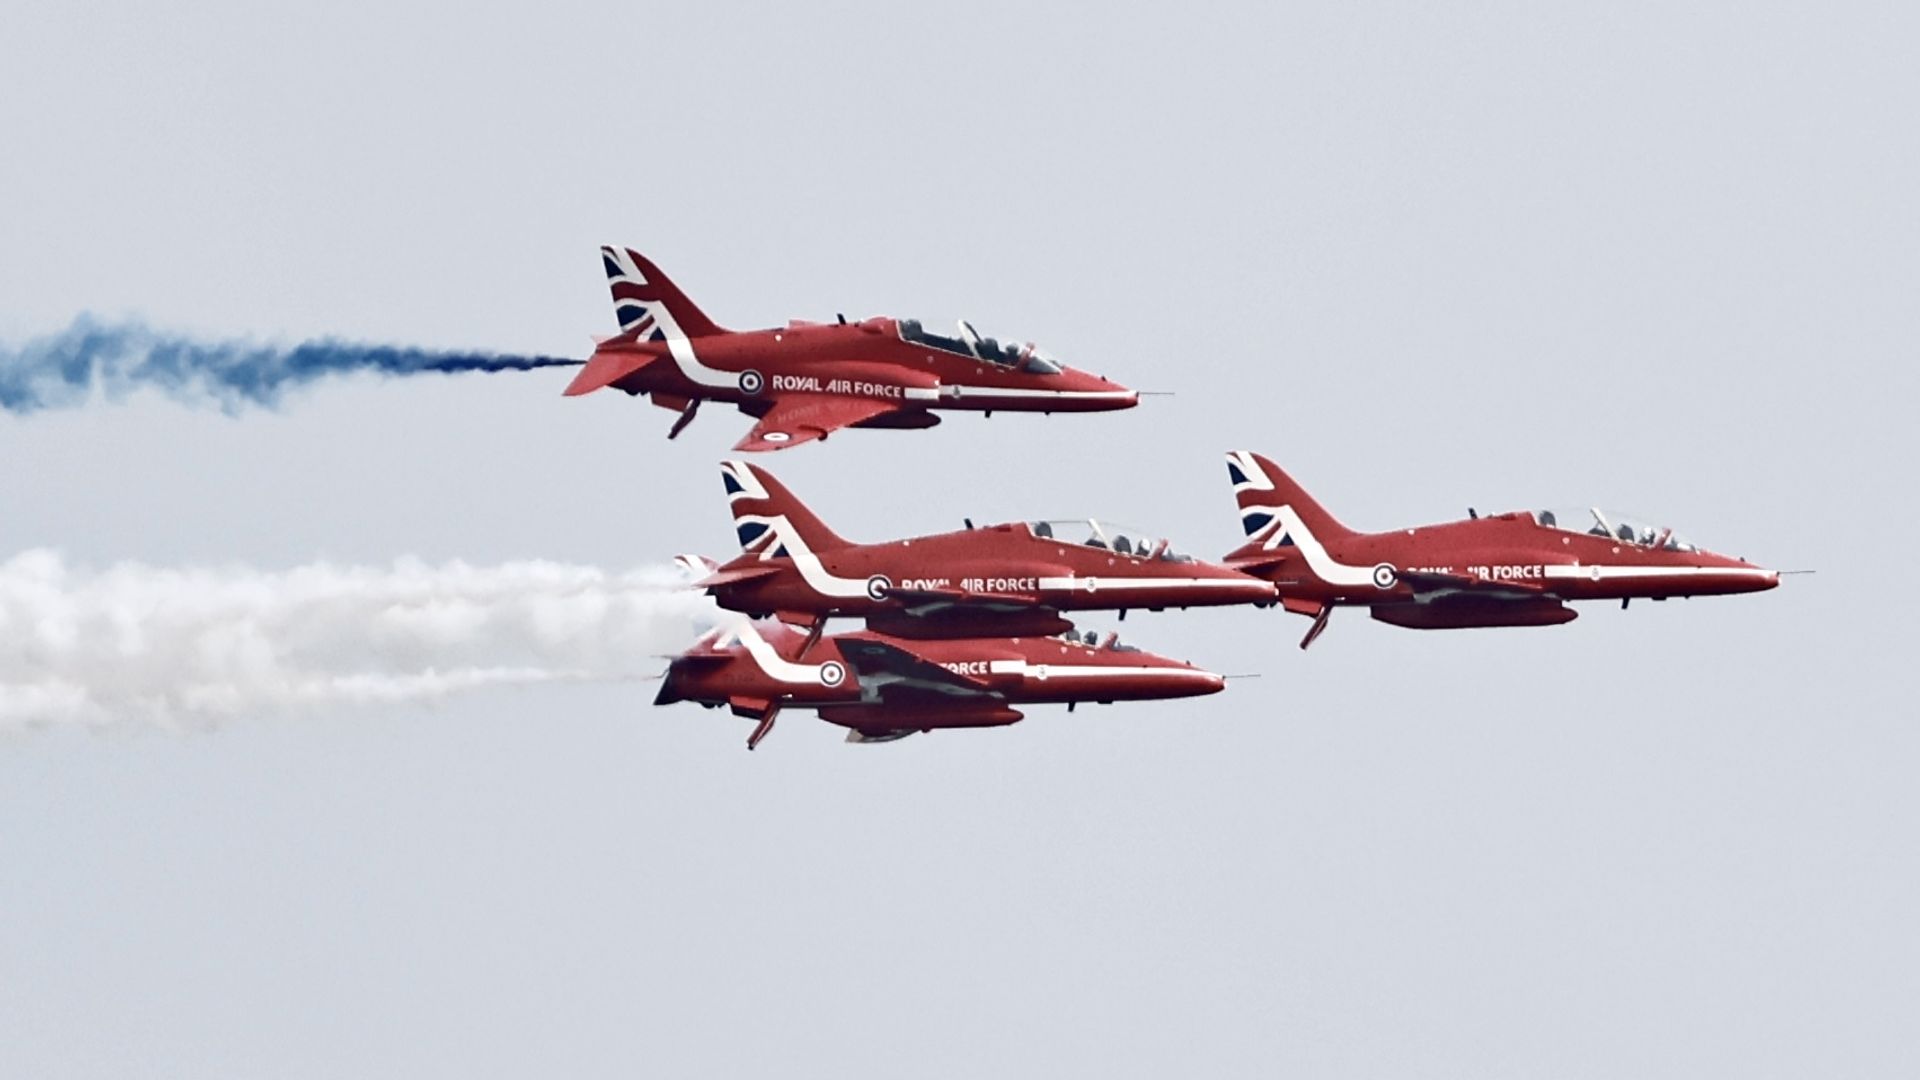 Four Red Arrows aircraft in flight